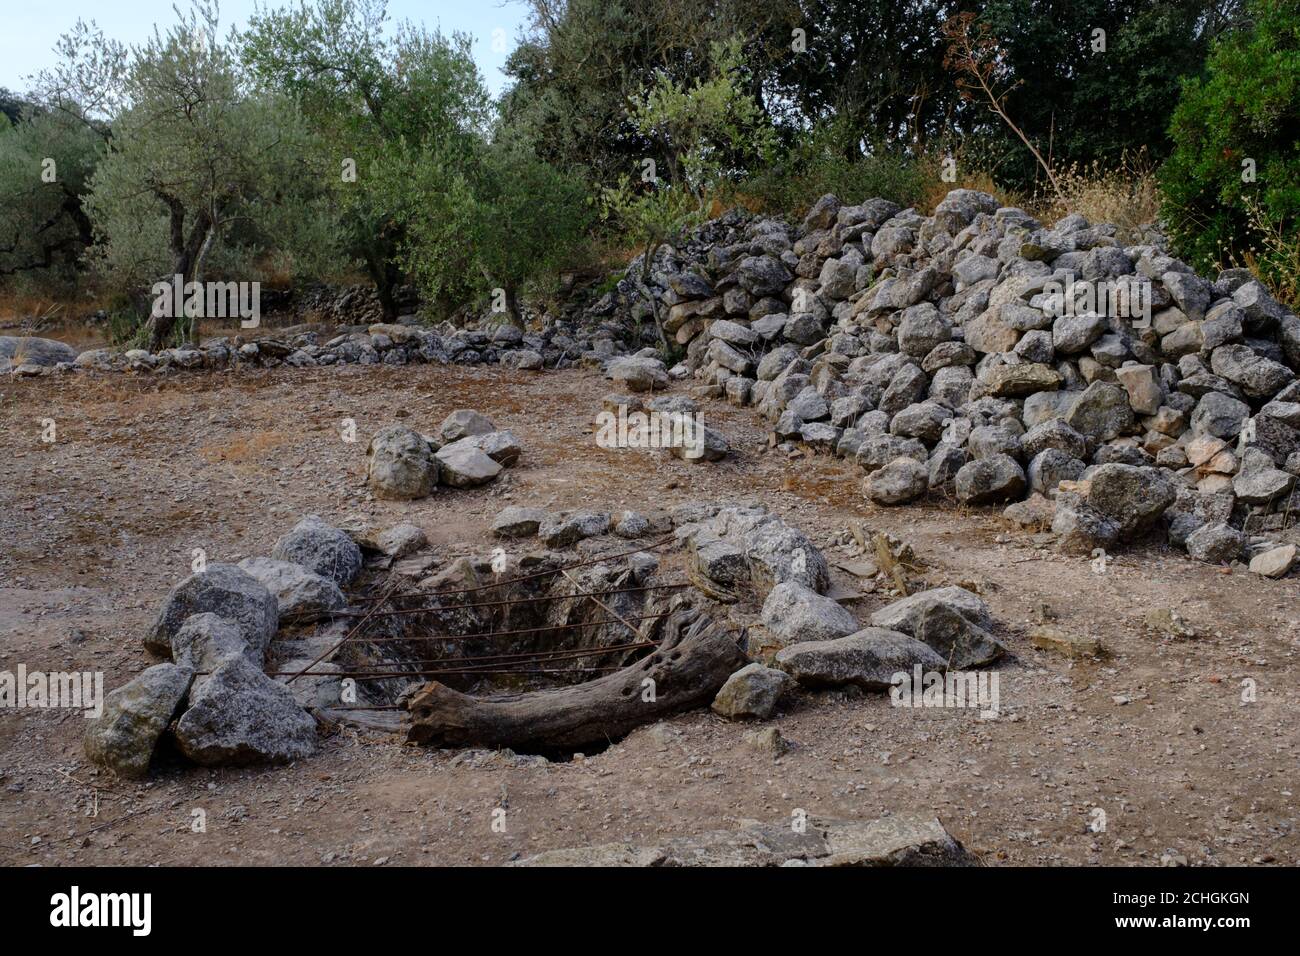 The Mazmullar cistern and the Mozarabic archaelogical remains near Comares, Malaga, Axarquia, Andalucia Spain Stock Photo